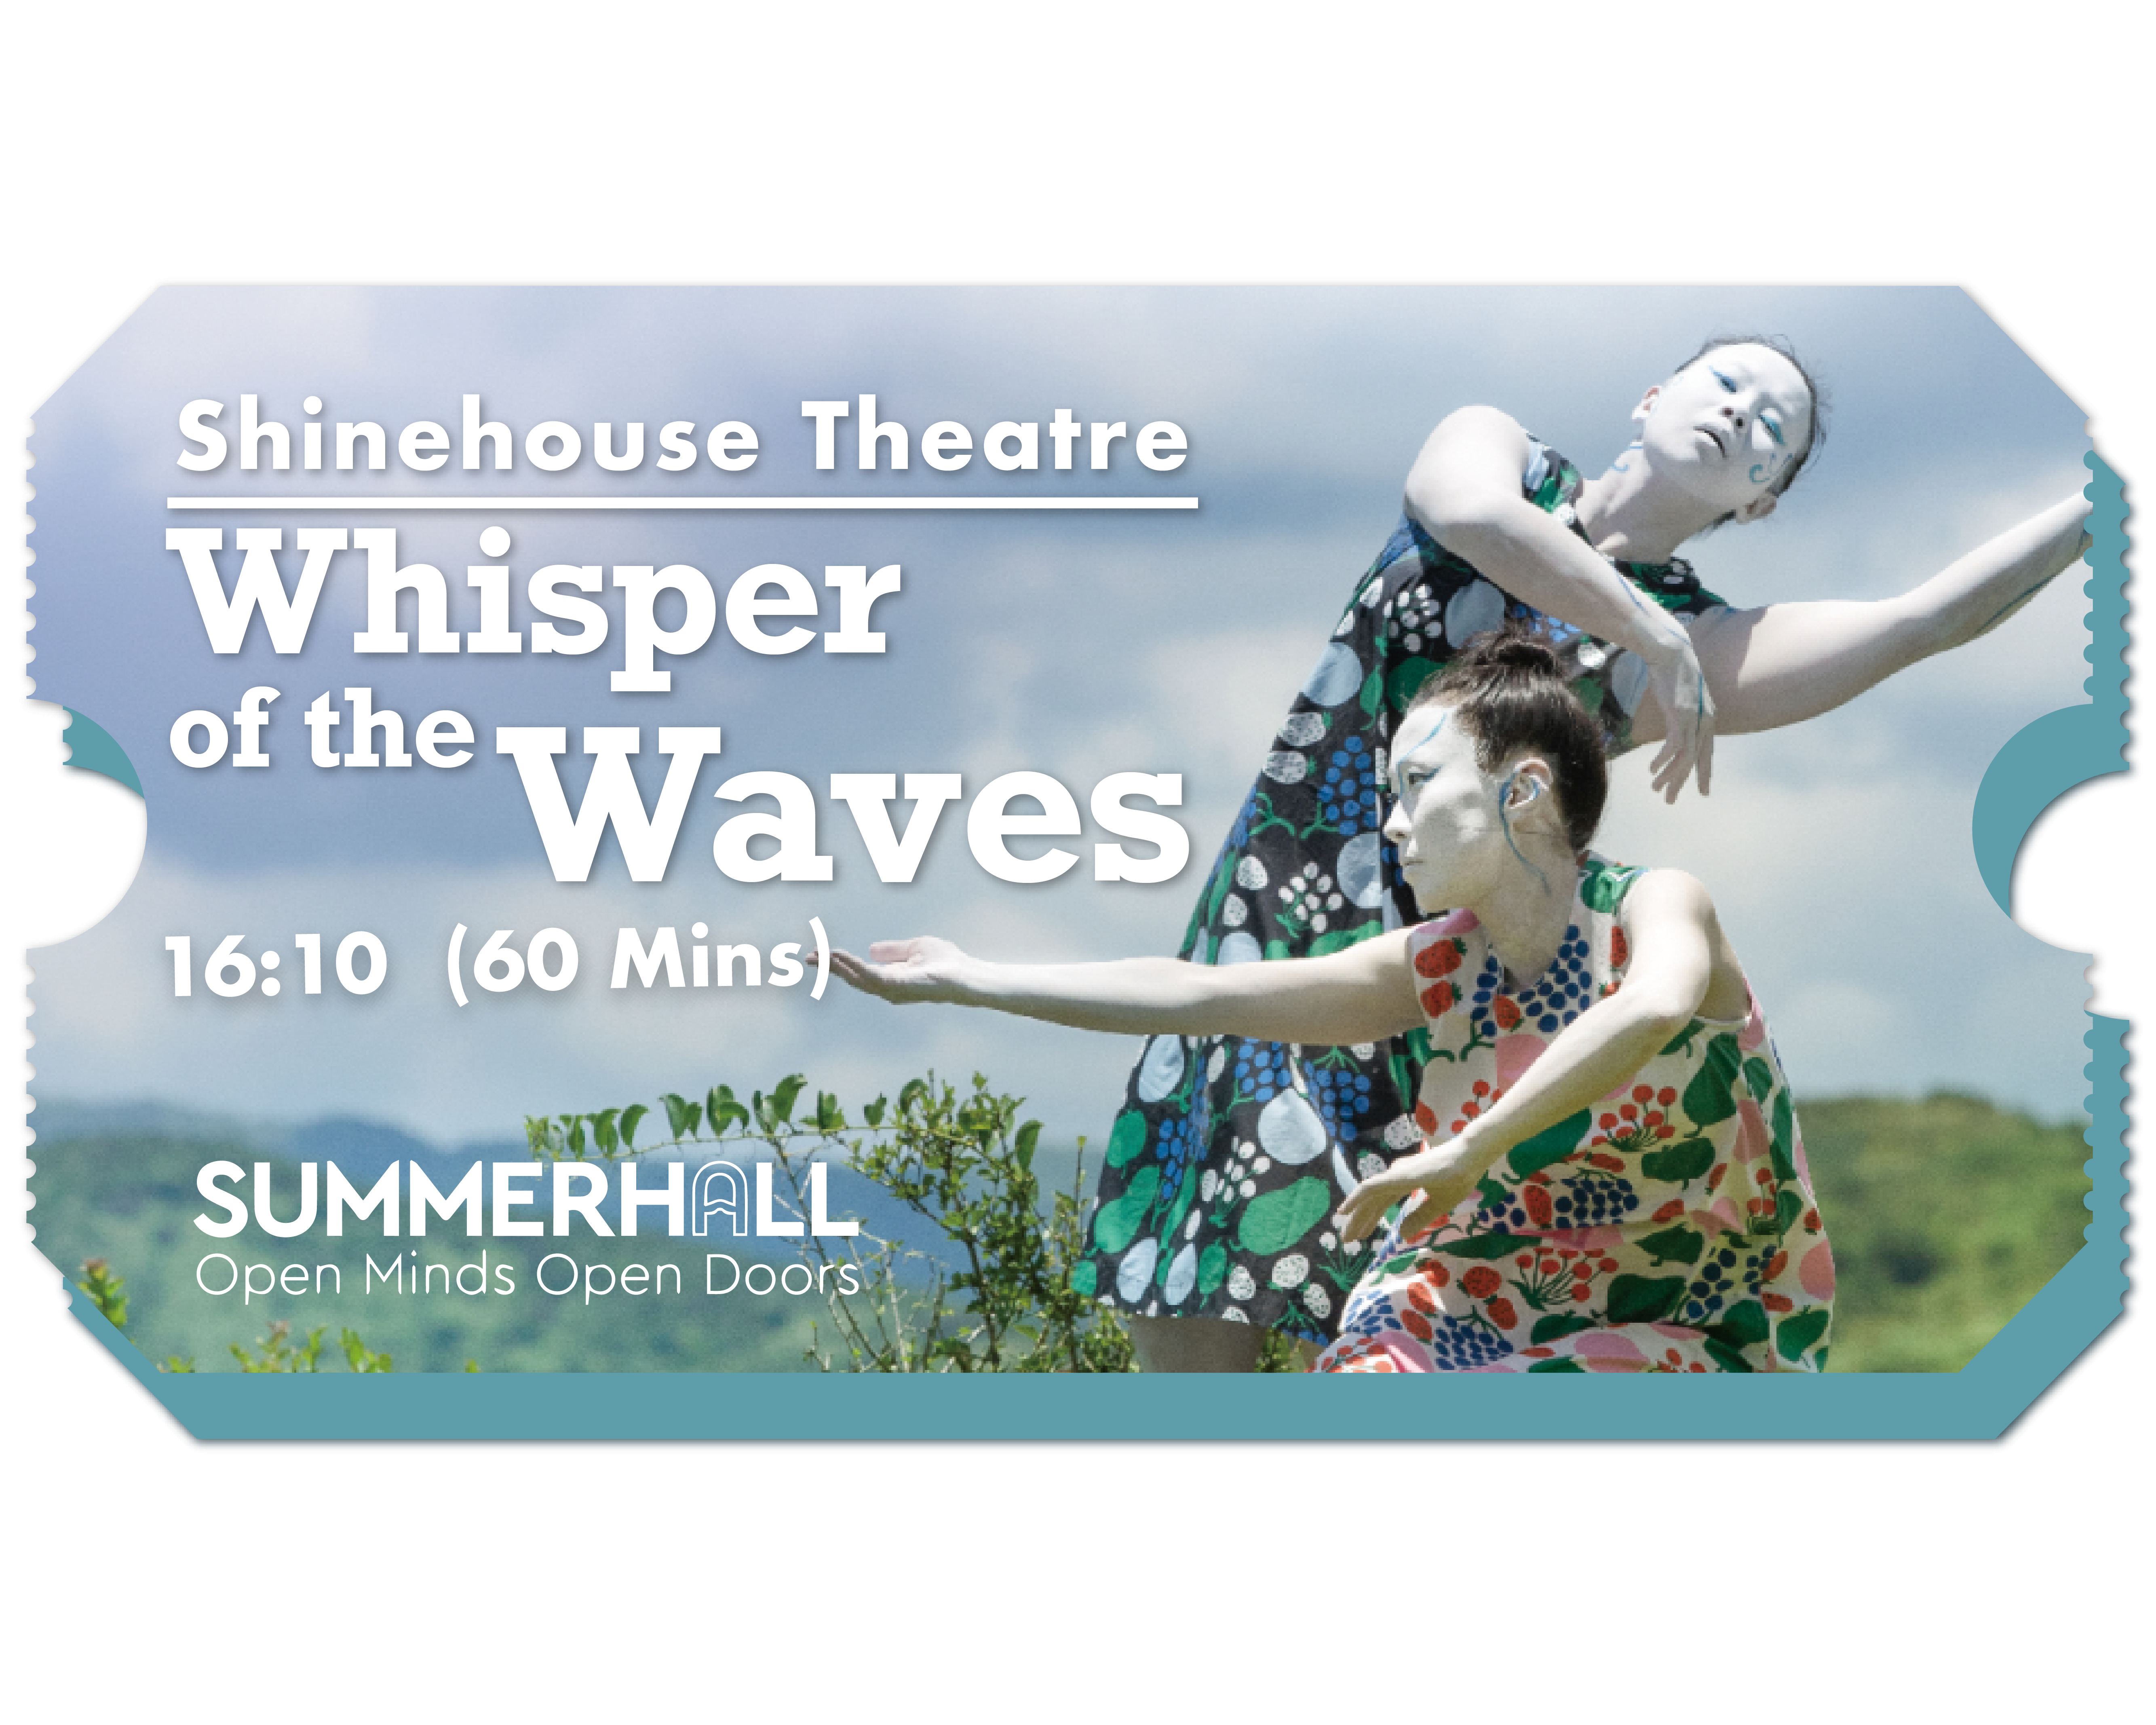 The Whisper of the Waves - Shinehouse Theatre